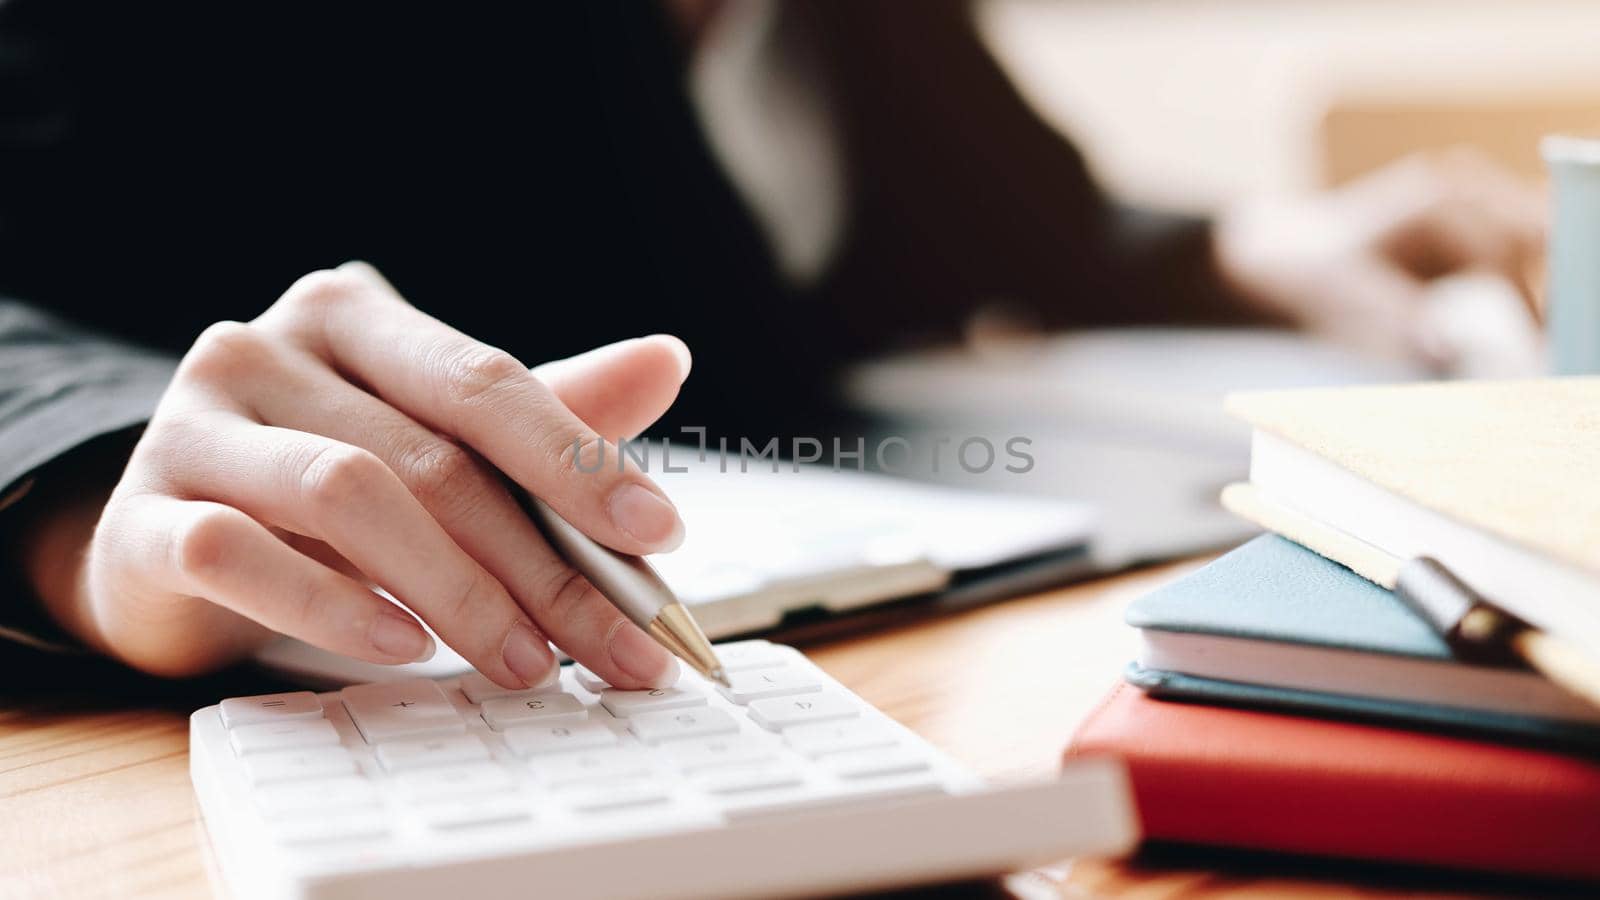 Close up Business woman using calculator and laptop for do math finance on wooden desk in office and business working background tax accounting statistics and analytic research concept
